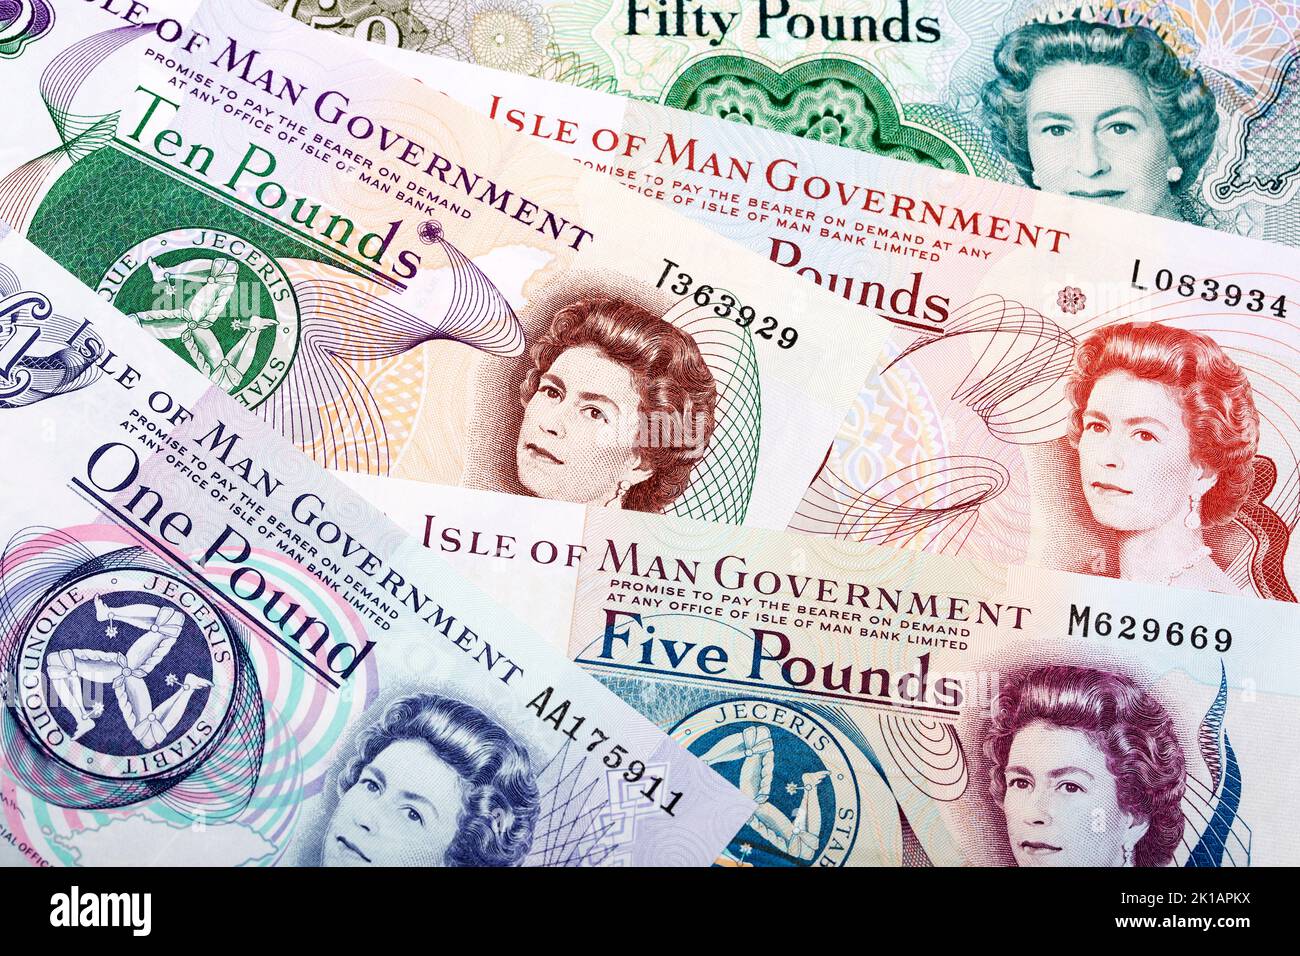 Currency of the Isle of Man - Pounds a business background Stock Photo